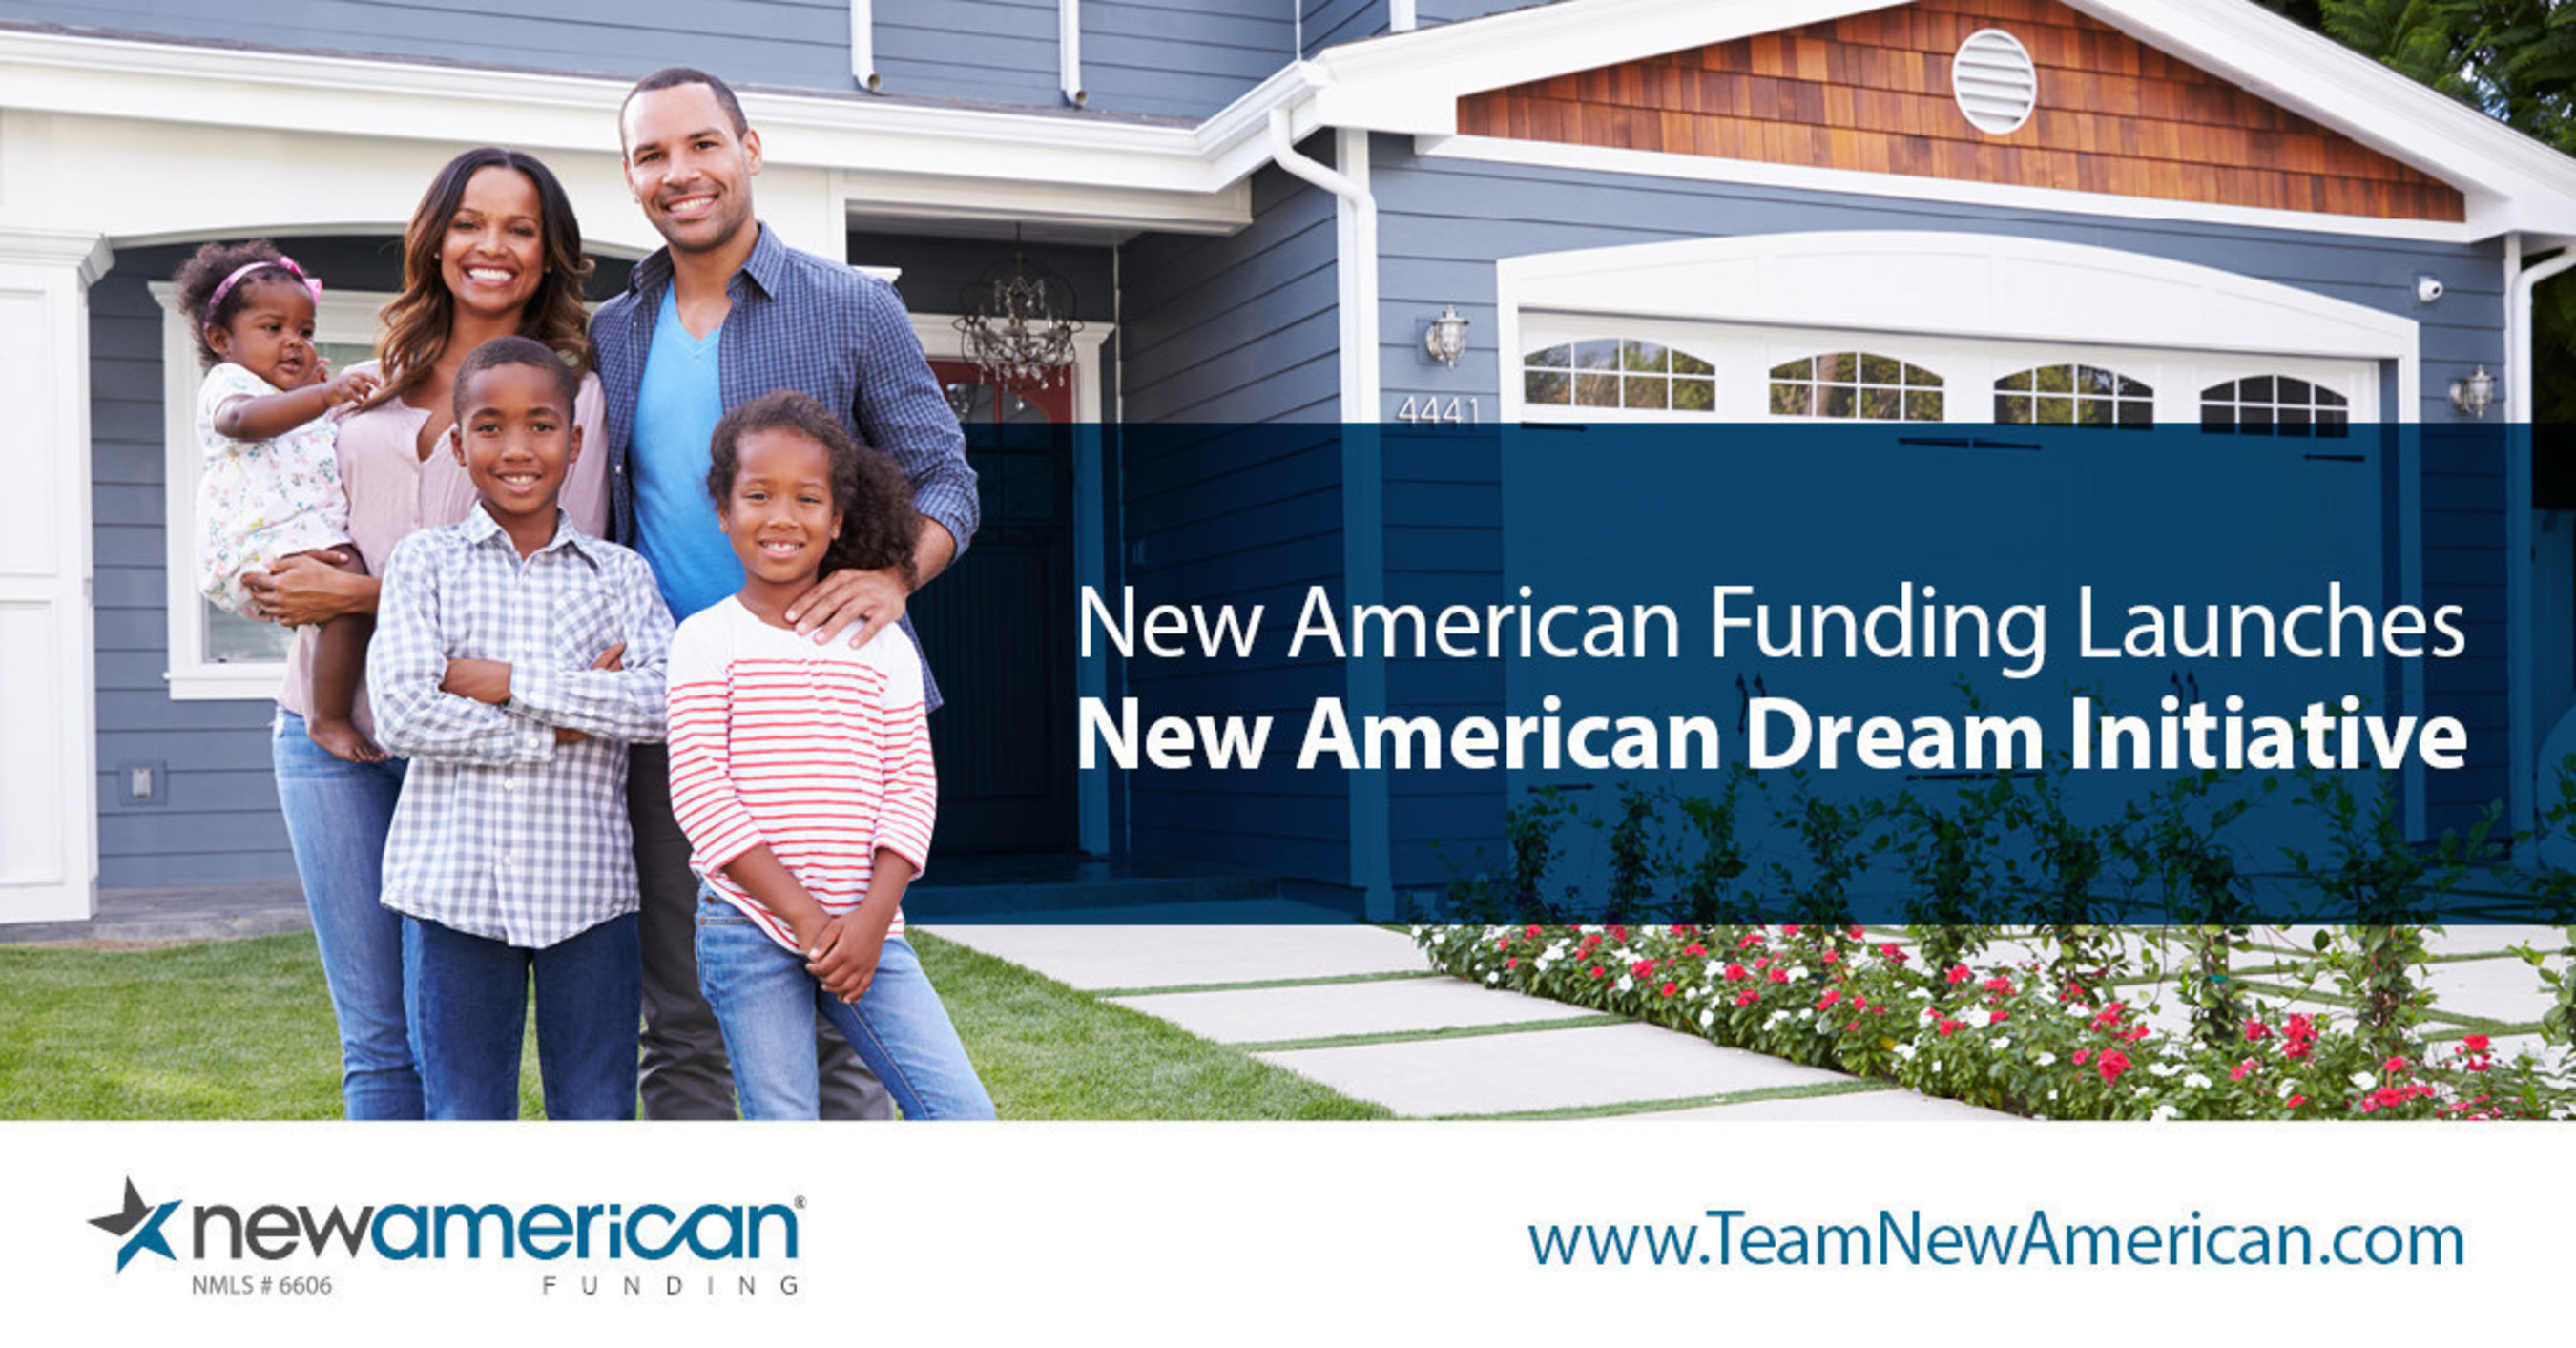 New American Funding Launches New American Dream Initiative.